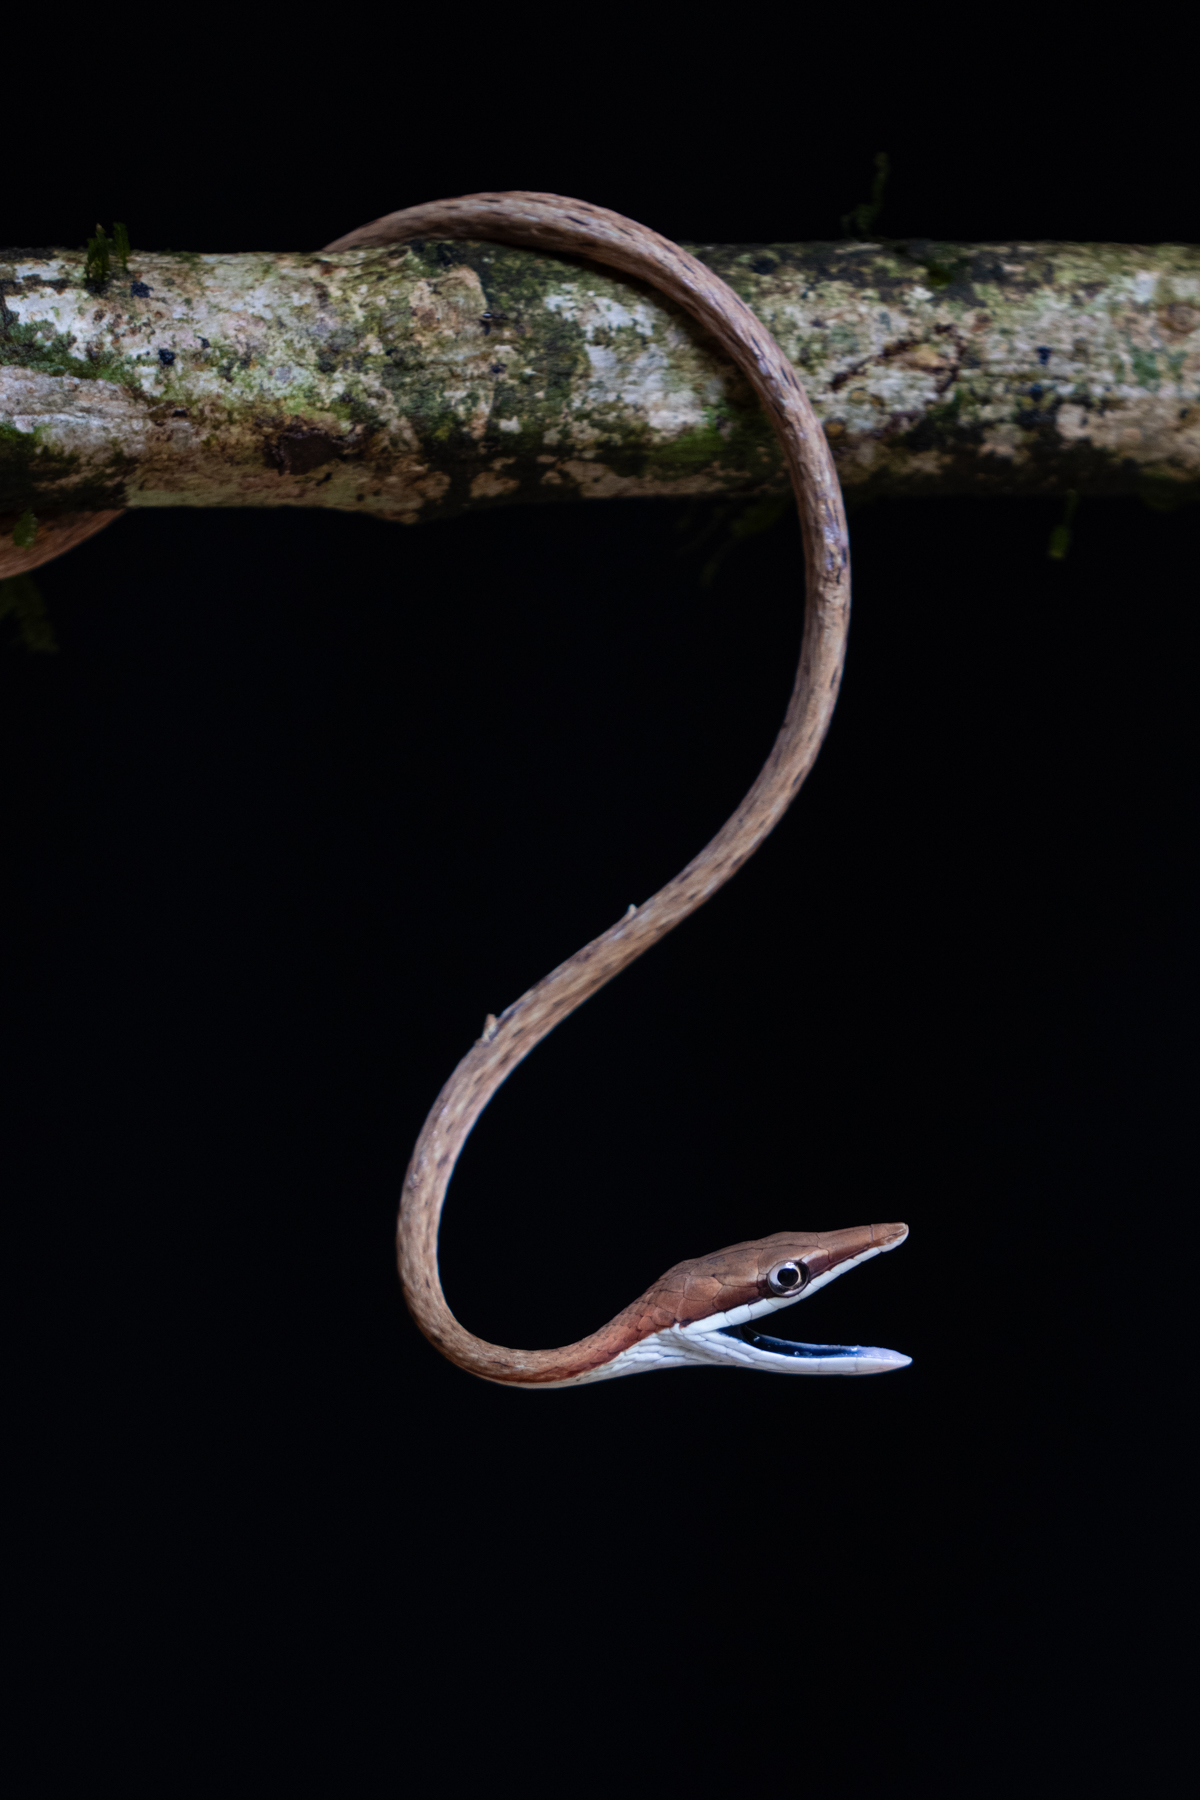 Elegant Brown Vine snake opening its jaws to reveal the beautiful navy blue colouration of its mouth (image by Inger Vandyke)